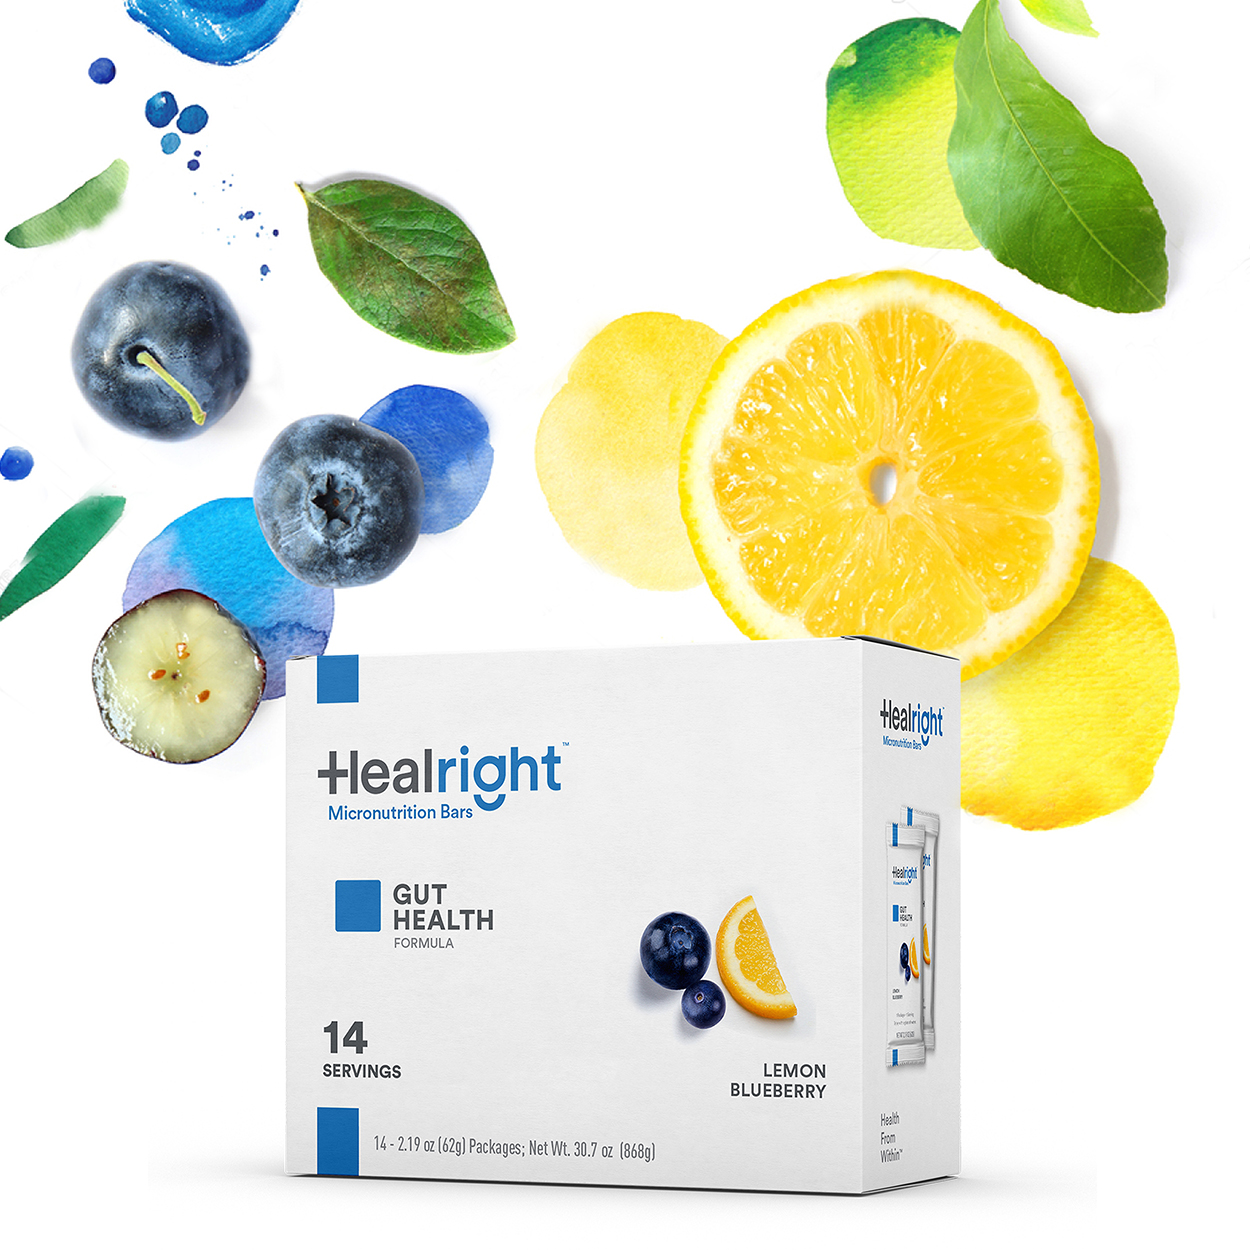 Healright Gut Health Daily with Lemon Blueberry flavor